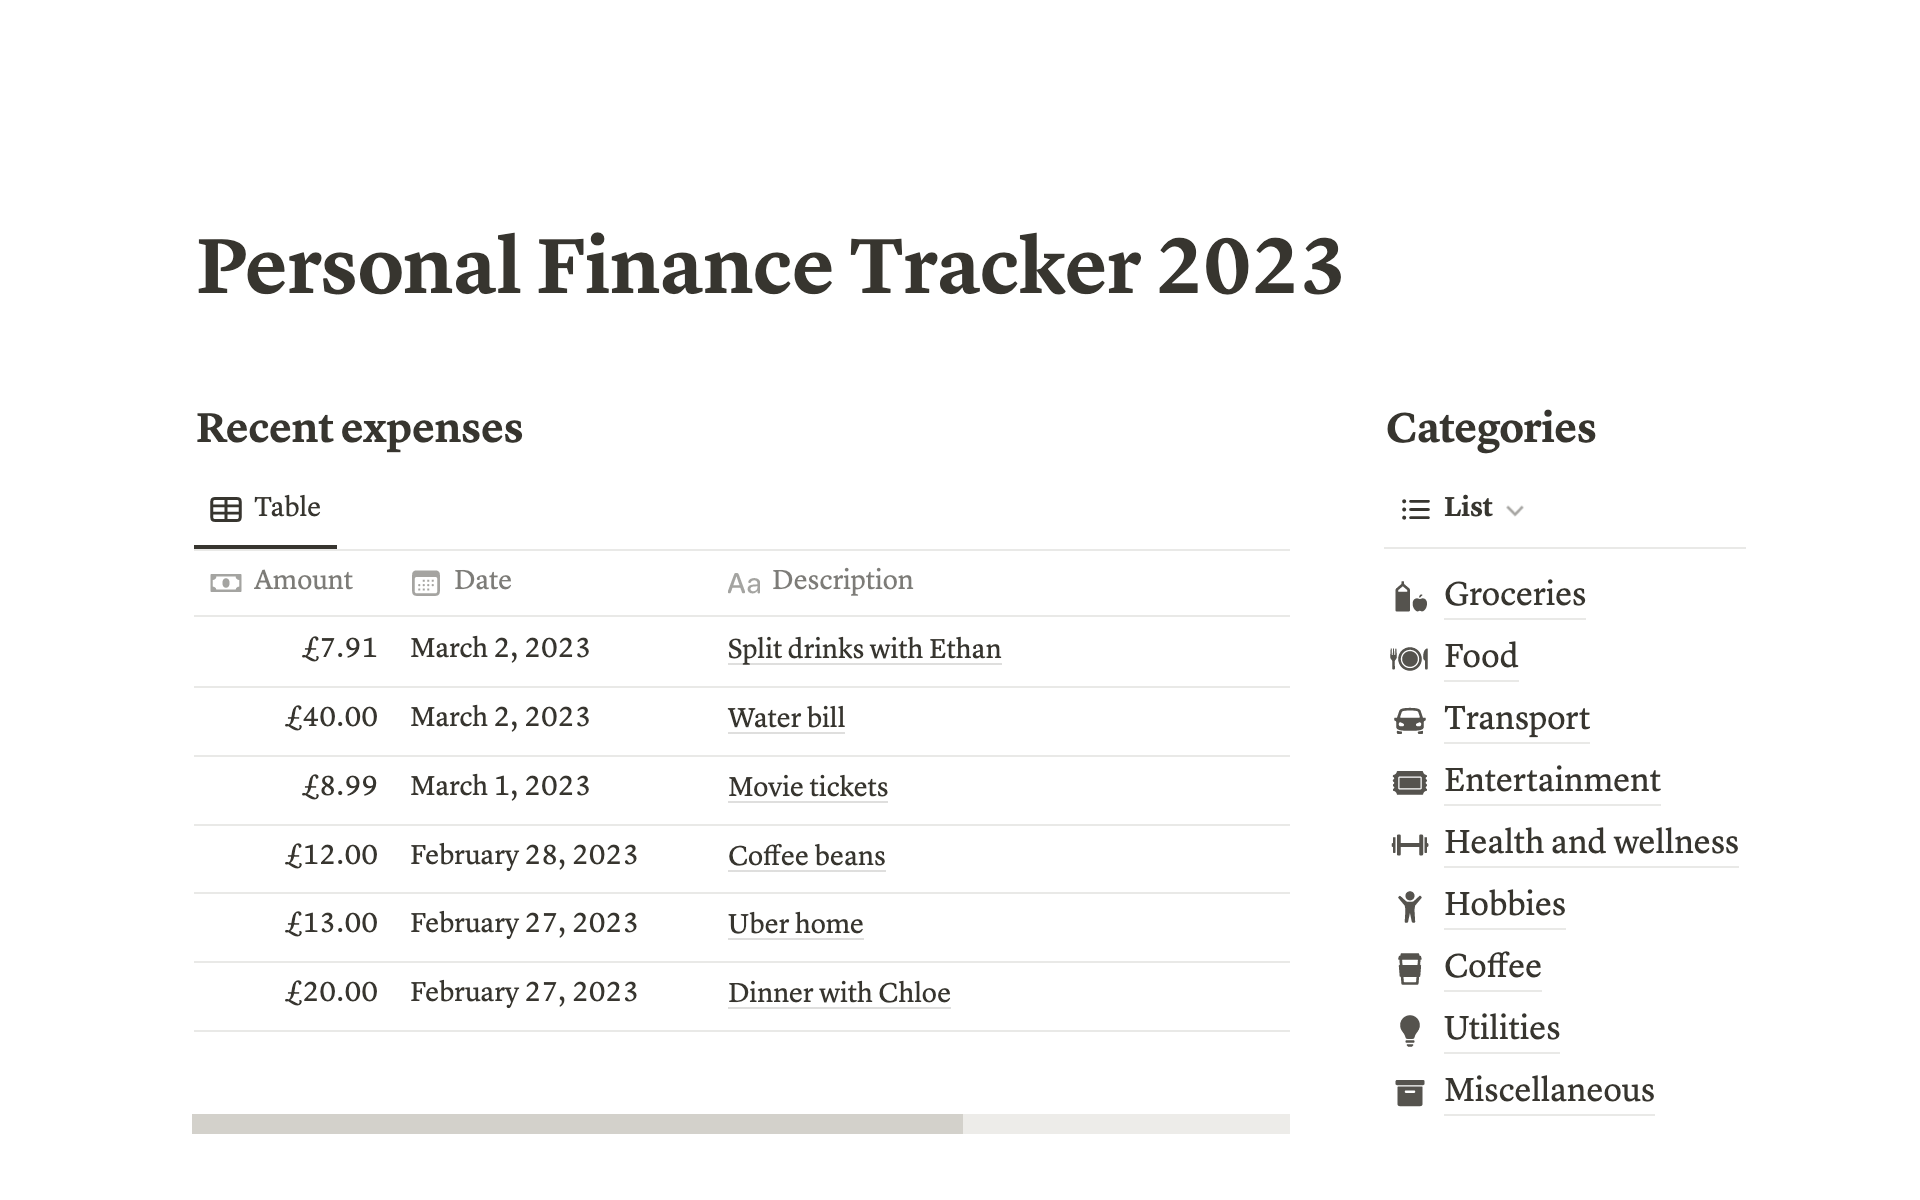 Helps you keep track of your personal finance!